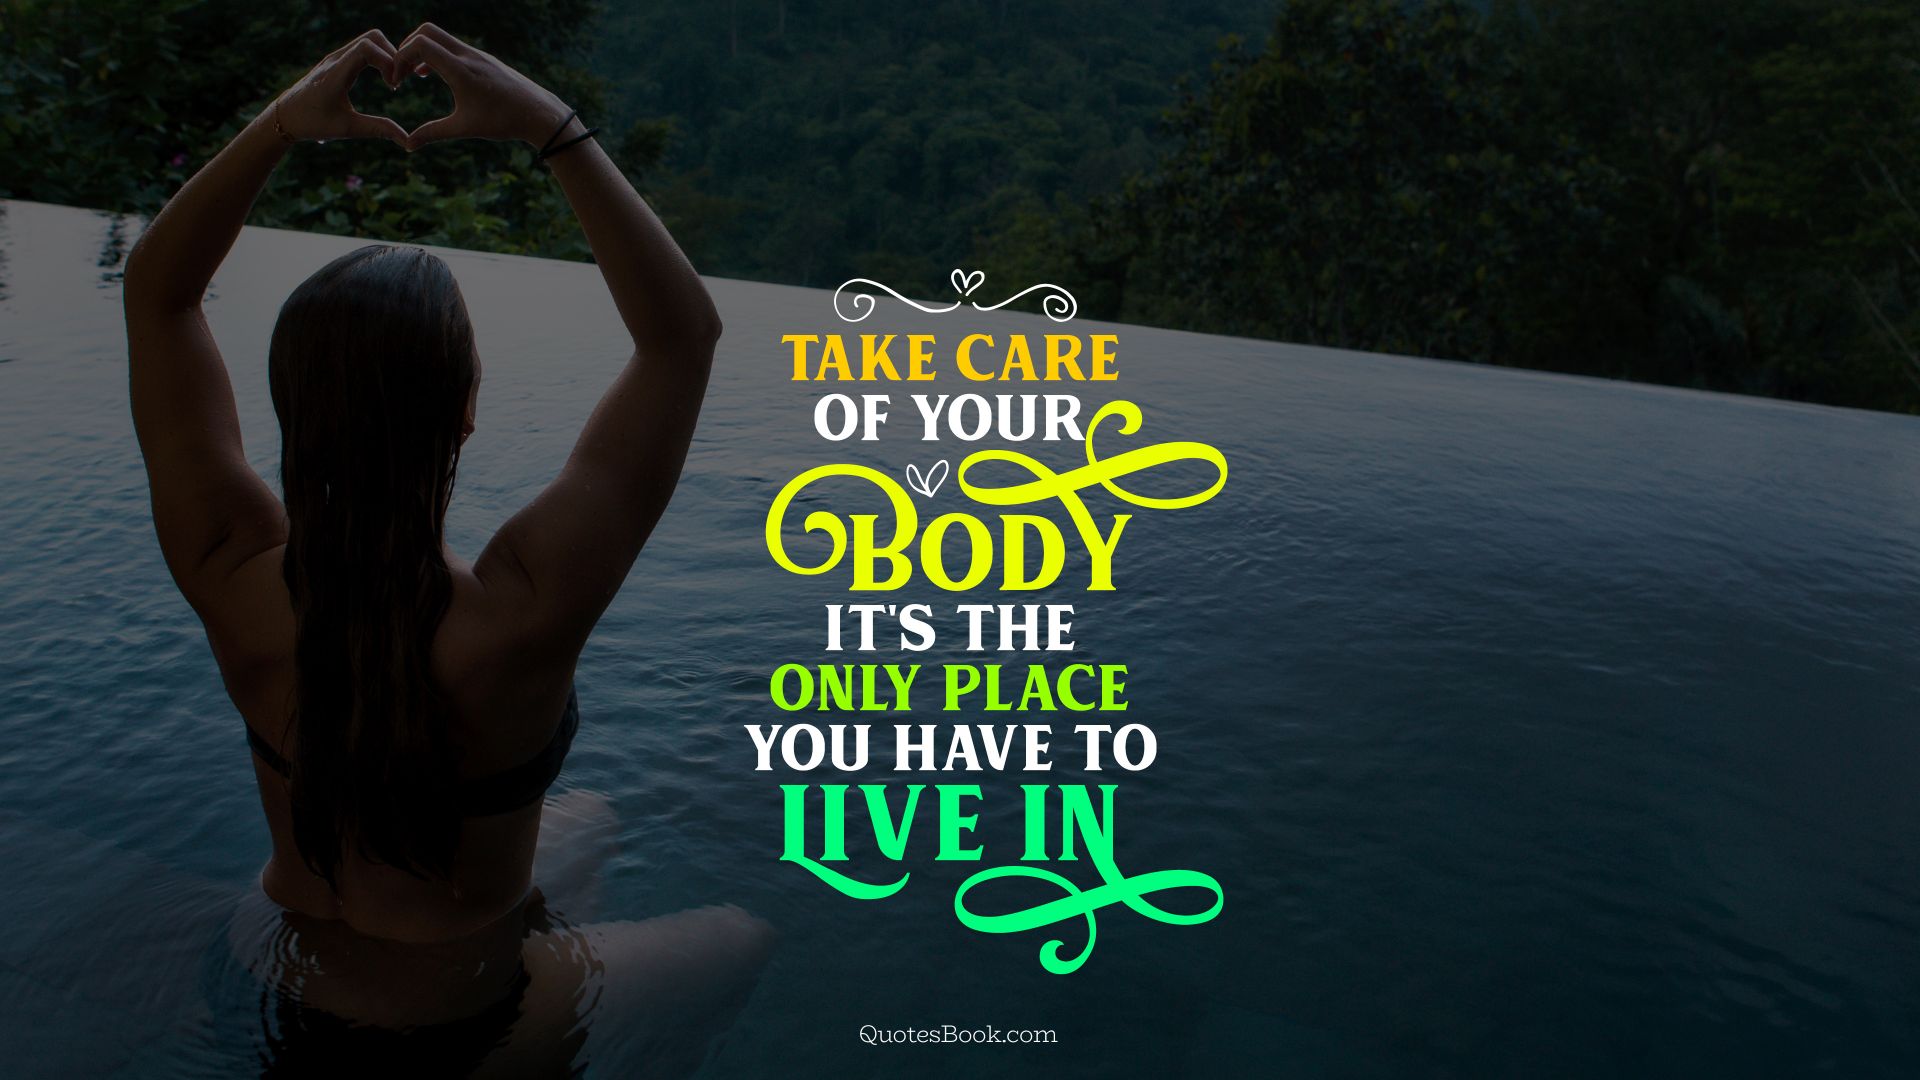 Take care of your body it's the only place you have to live in